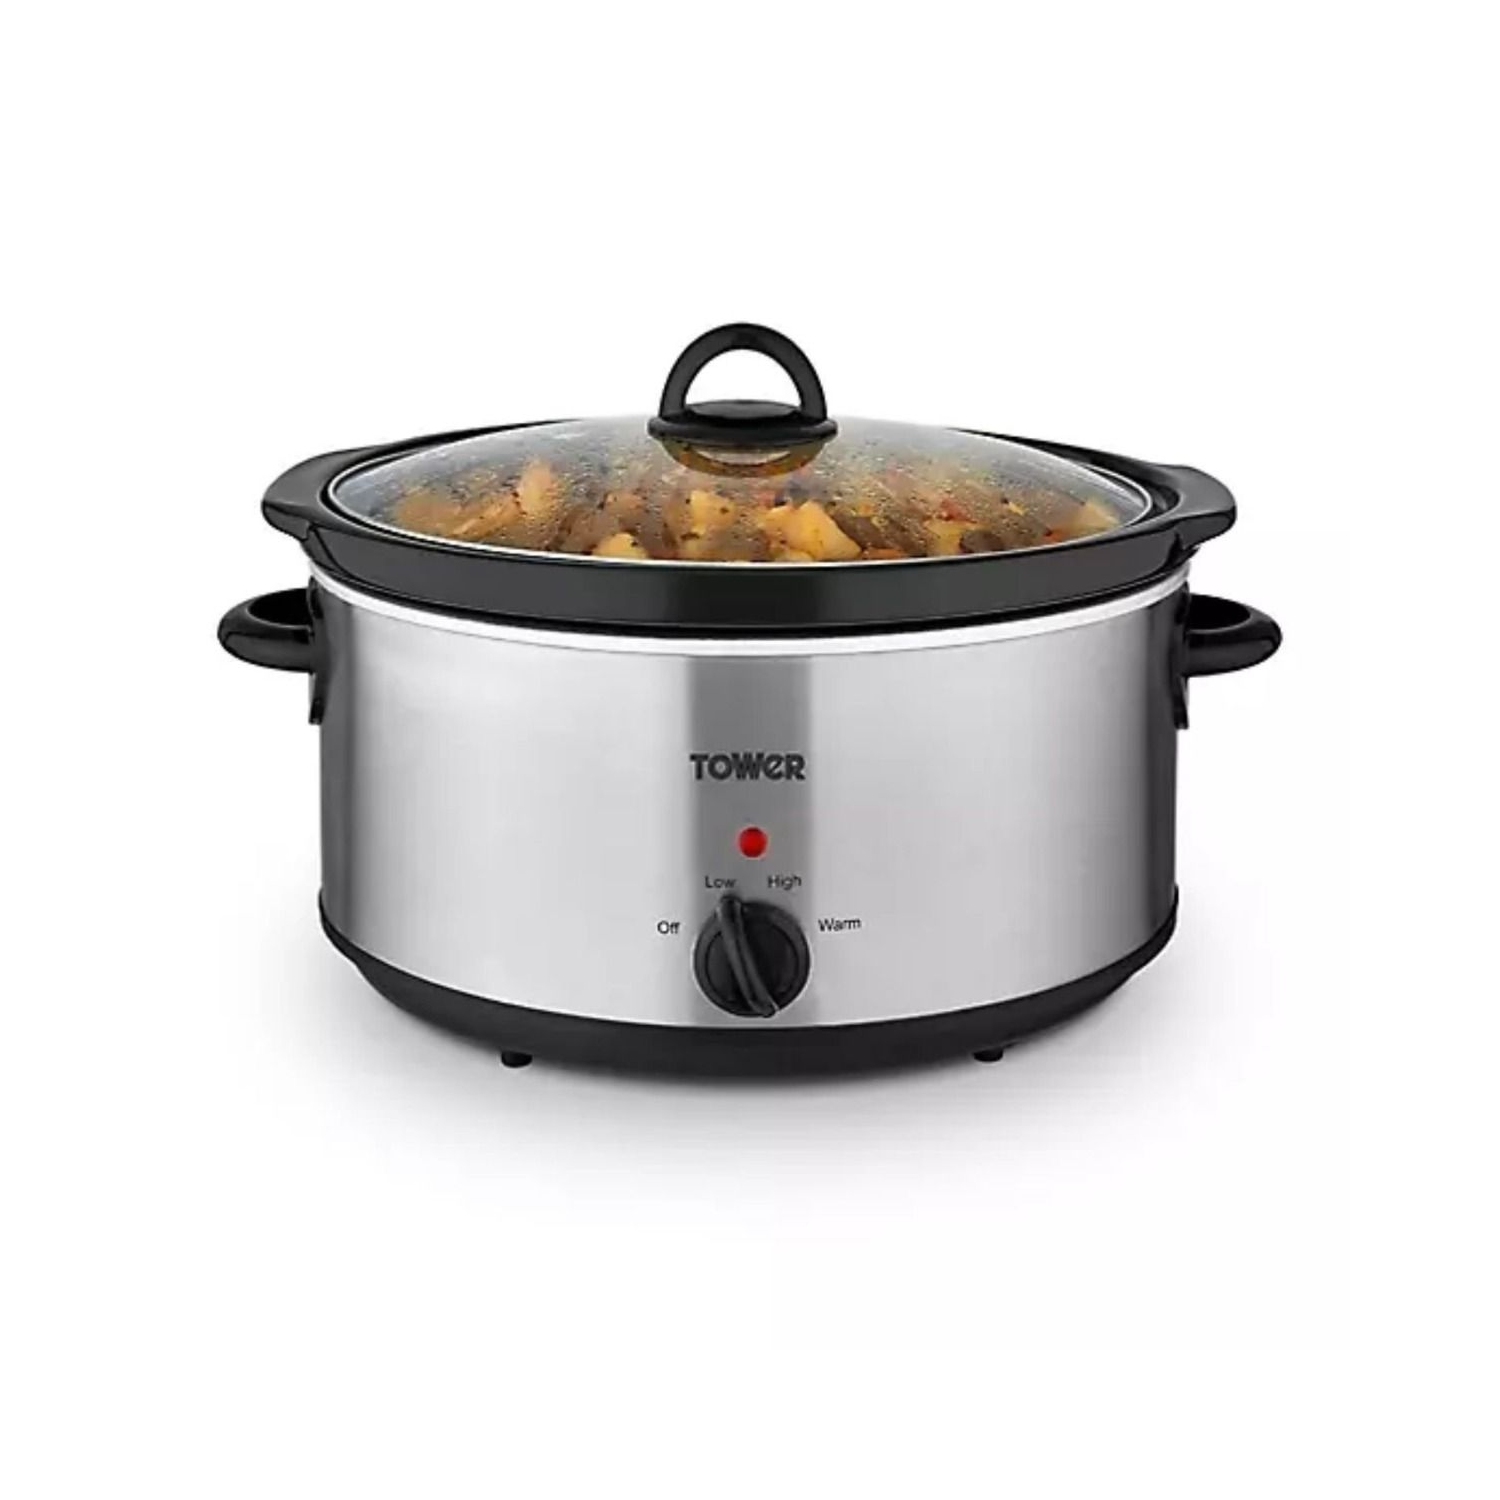 Stainless-Steel Compact 1.5L Slow Cooker